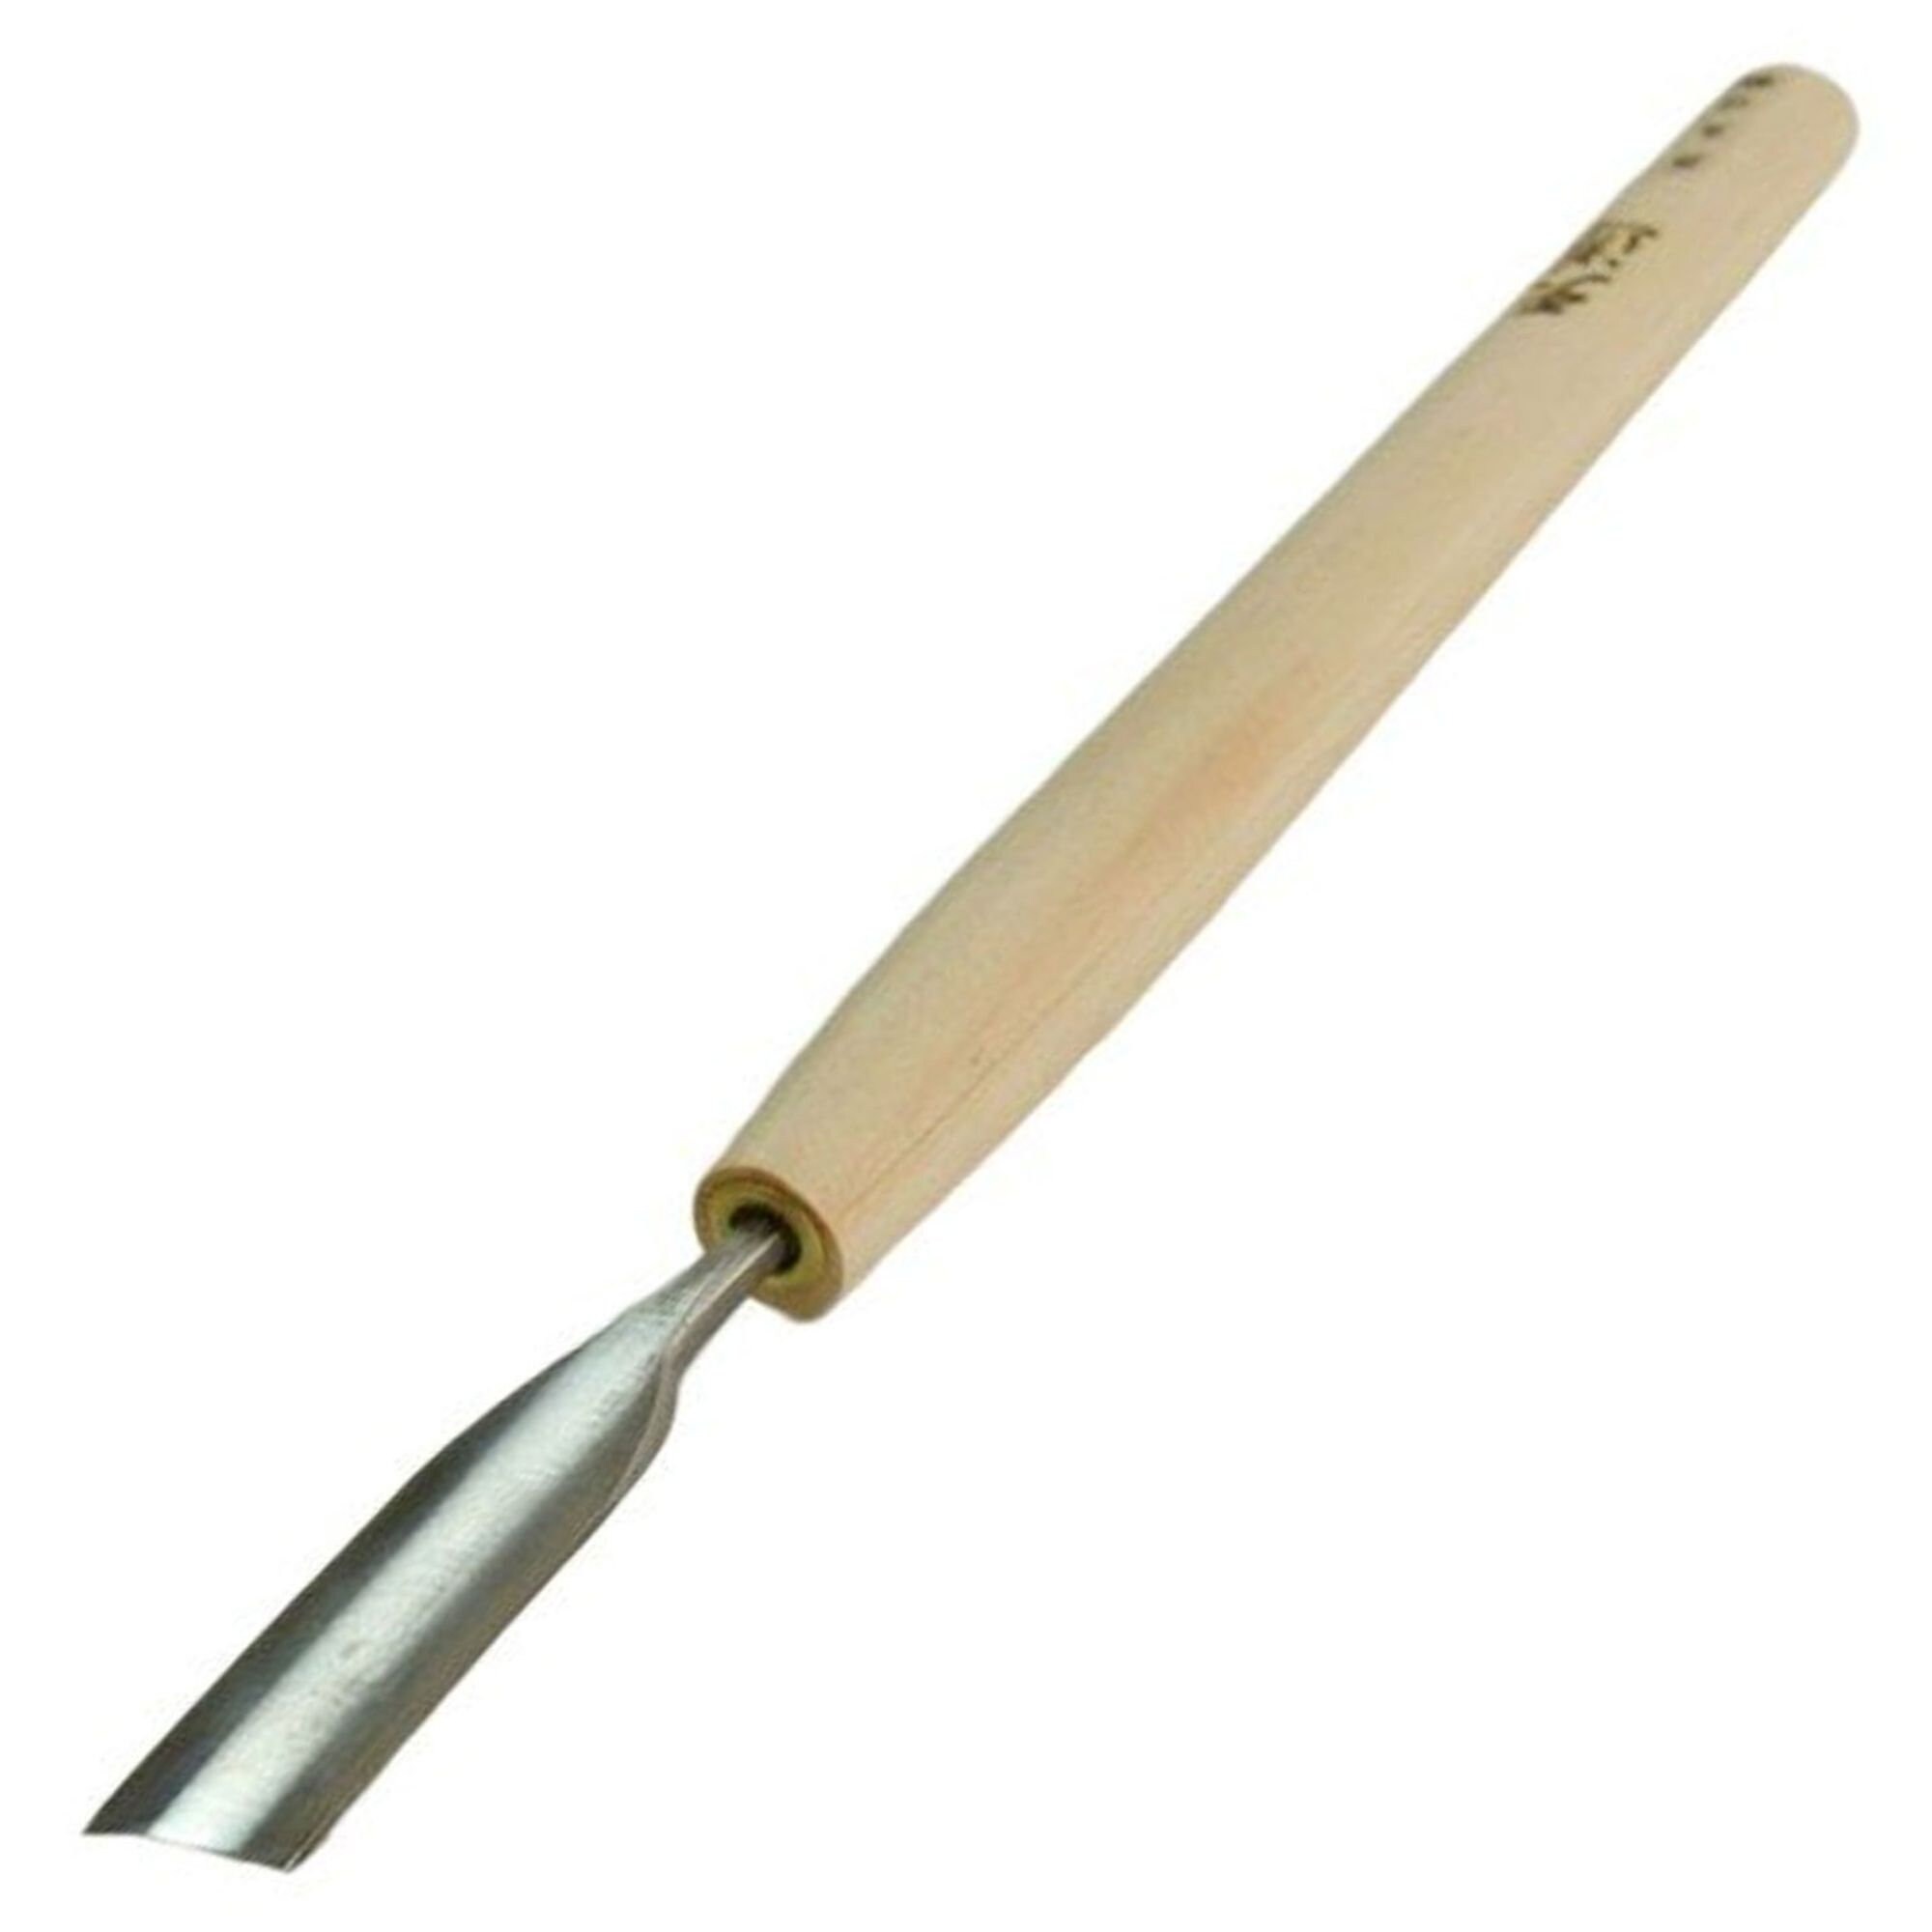 Wooden Mallet Craft Hammer Maul 300g for Leathercraft, Wood Carving,  Carpentry, and Jewellery Making